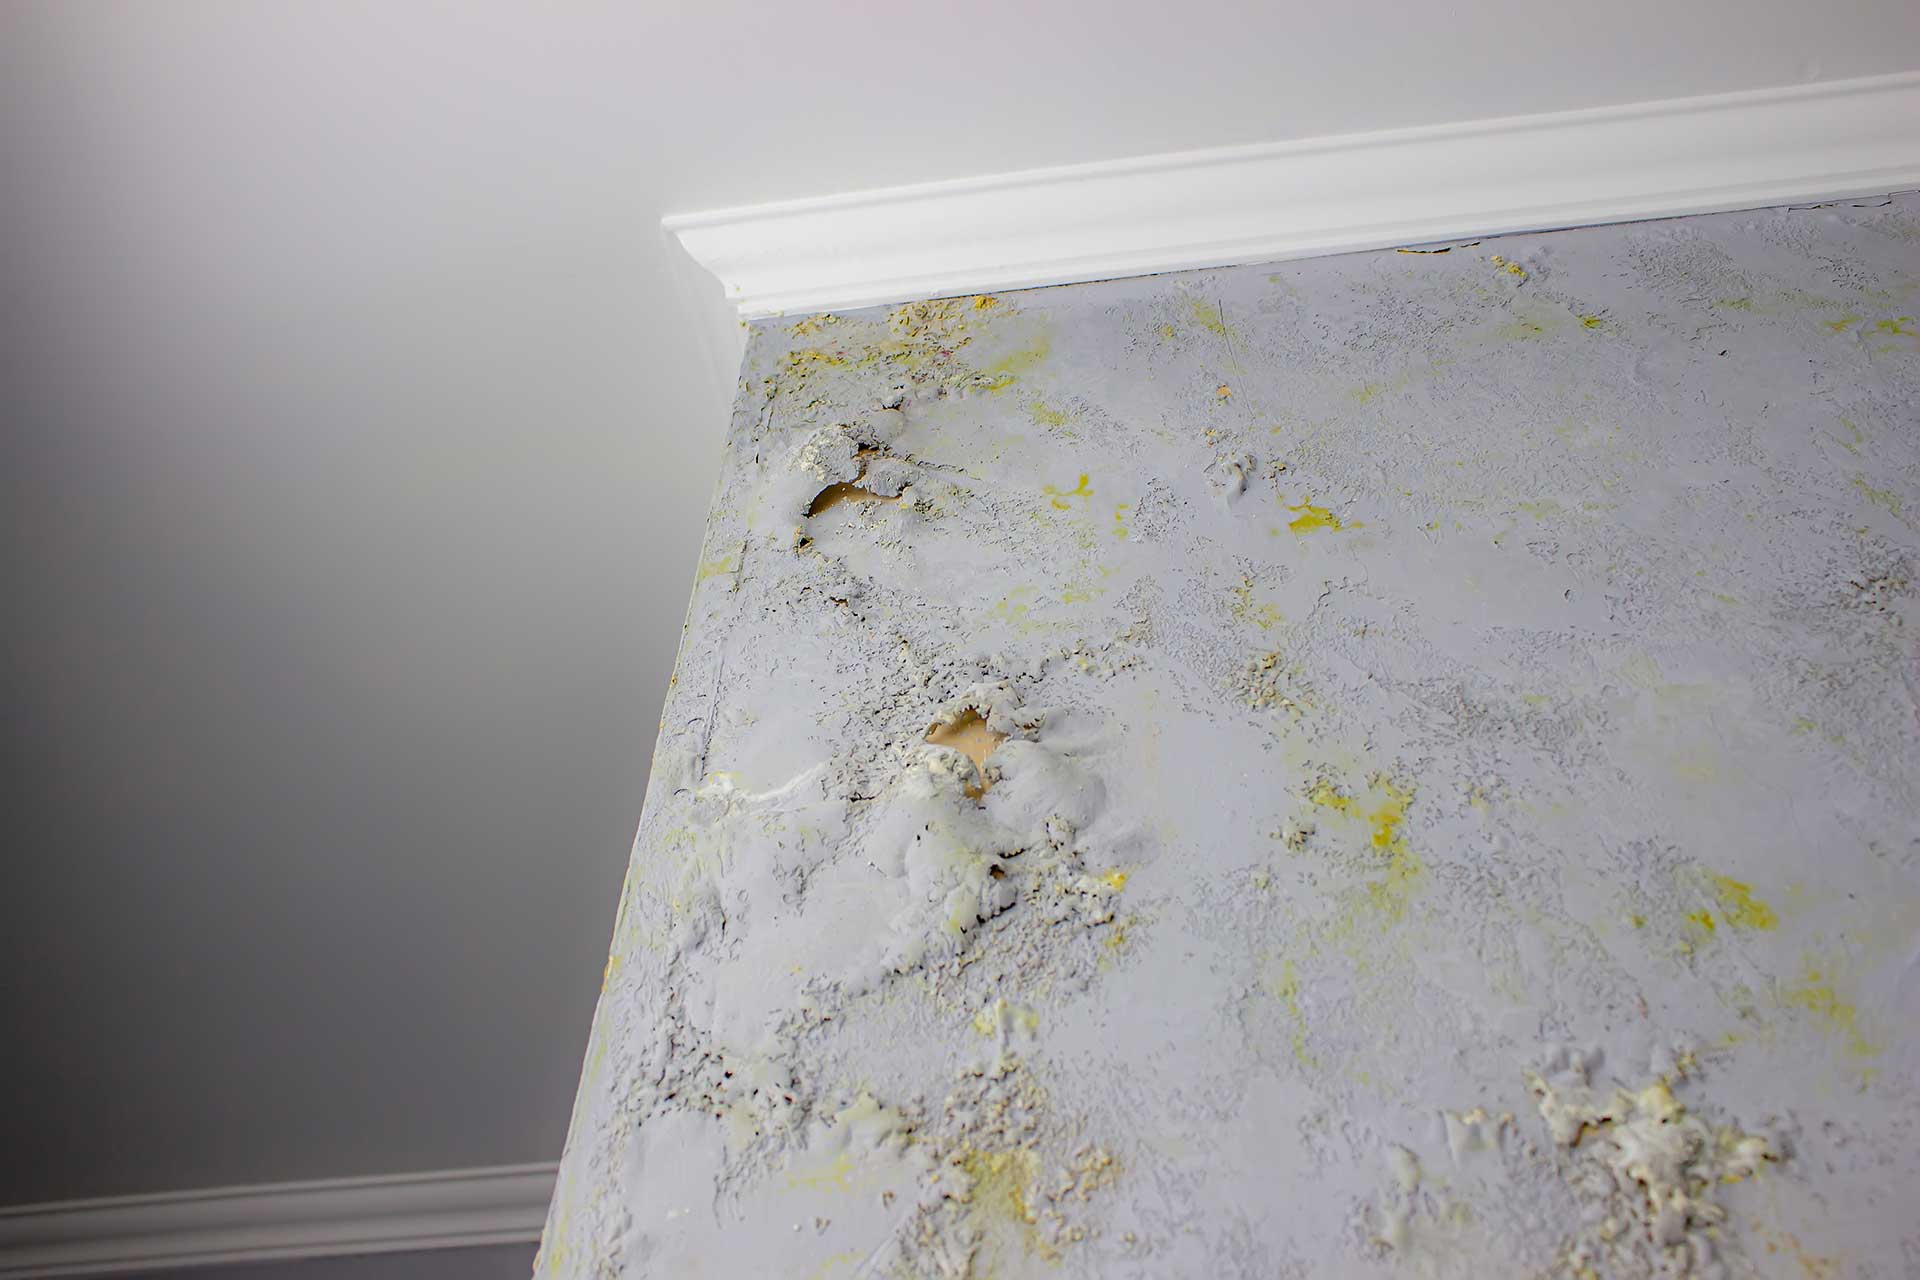 Find-out-where-mold-lurks-in-your-home-Discover-the-top-spots-for-mold-growth-and-how-to-prevent-it-Featured